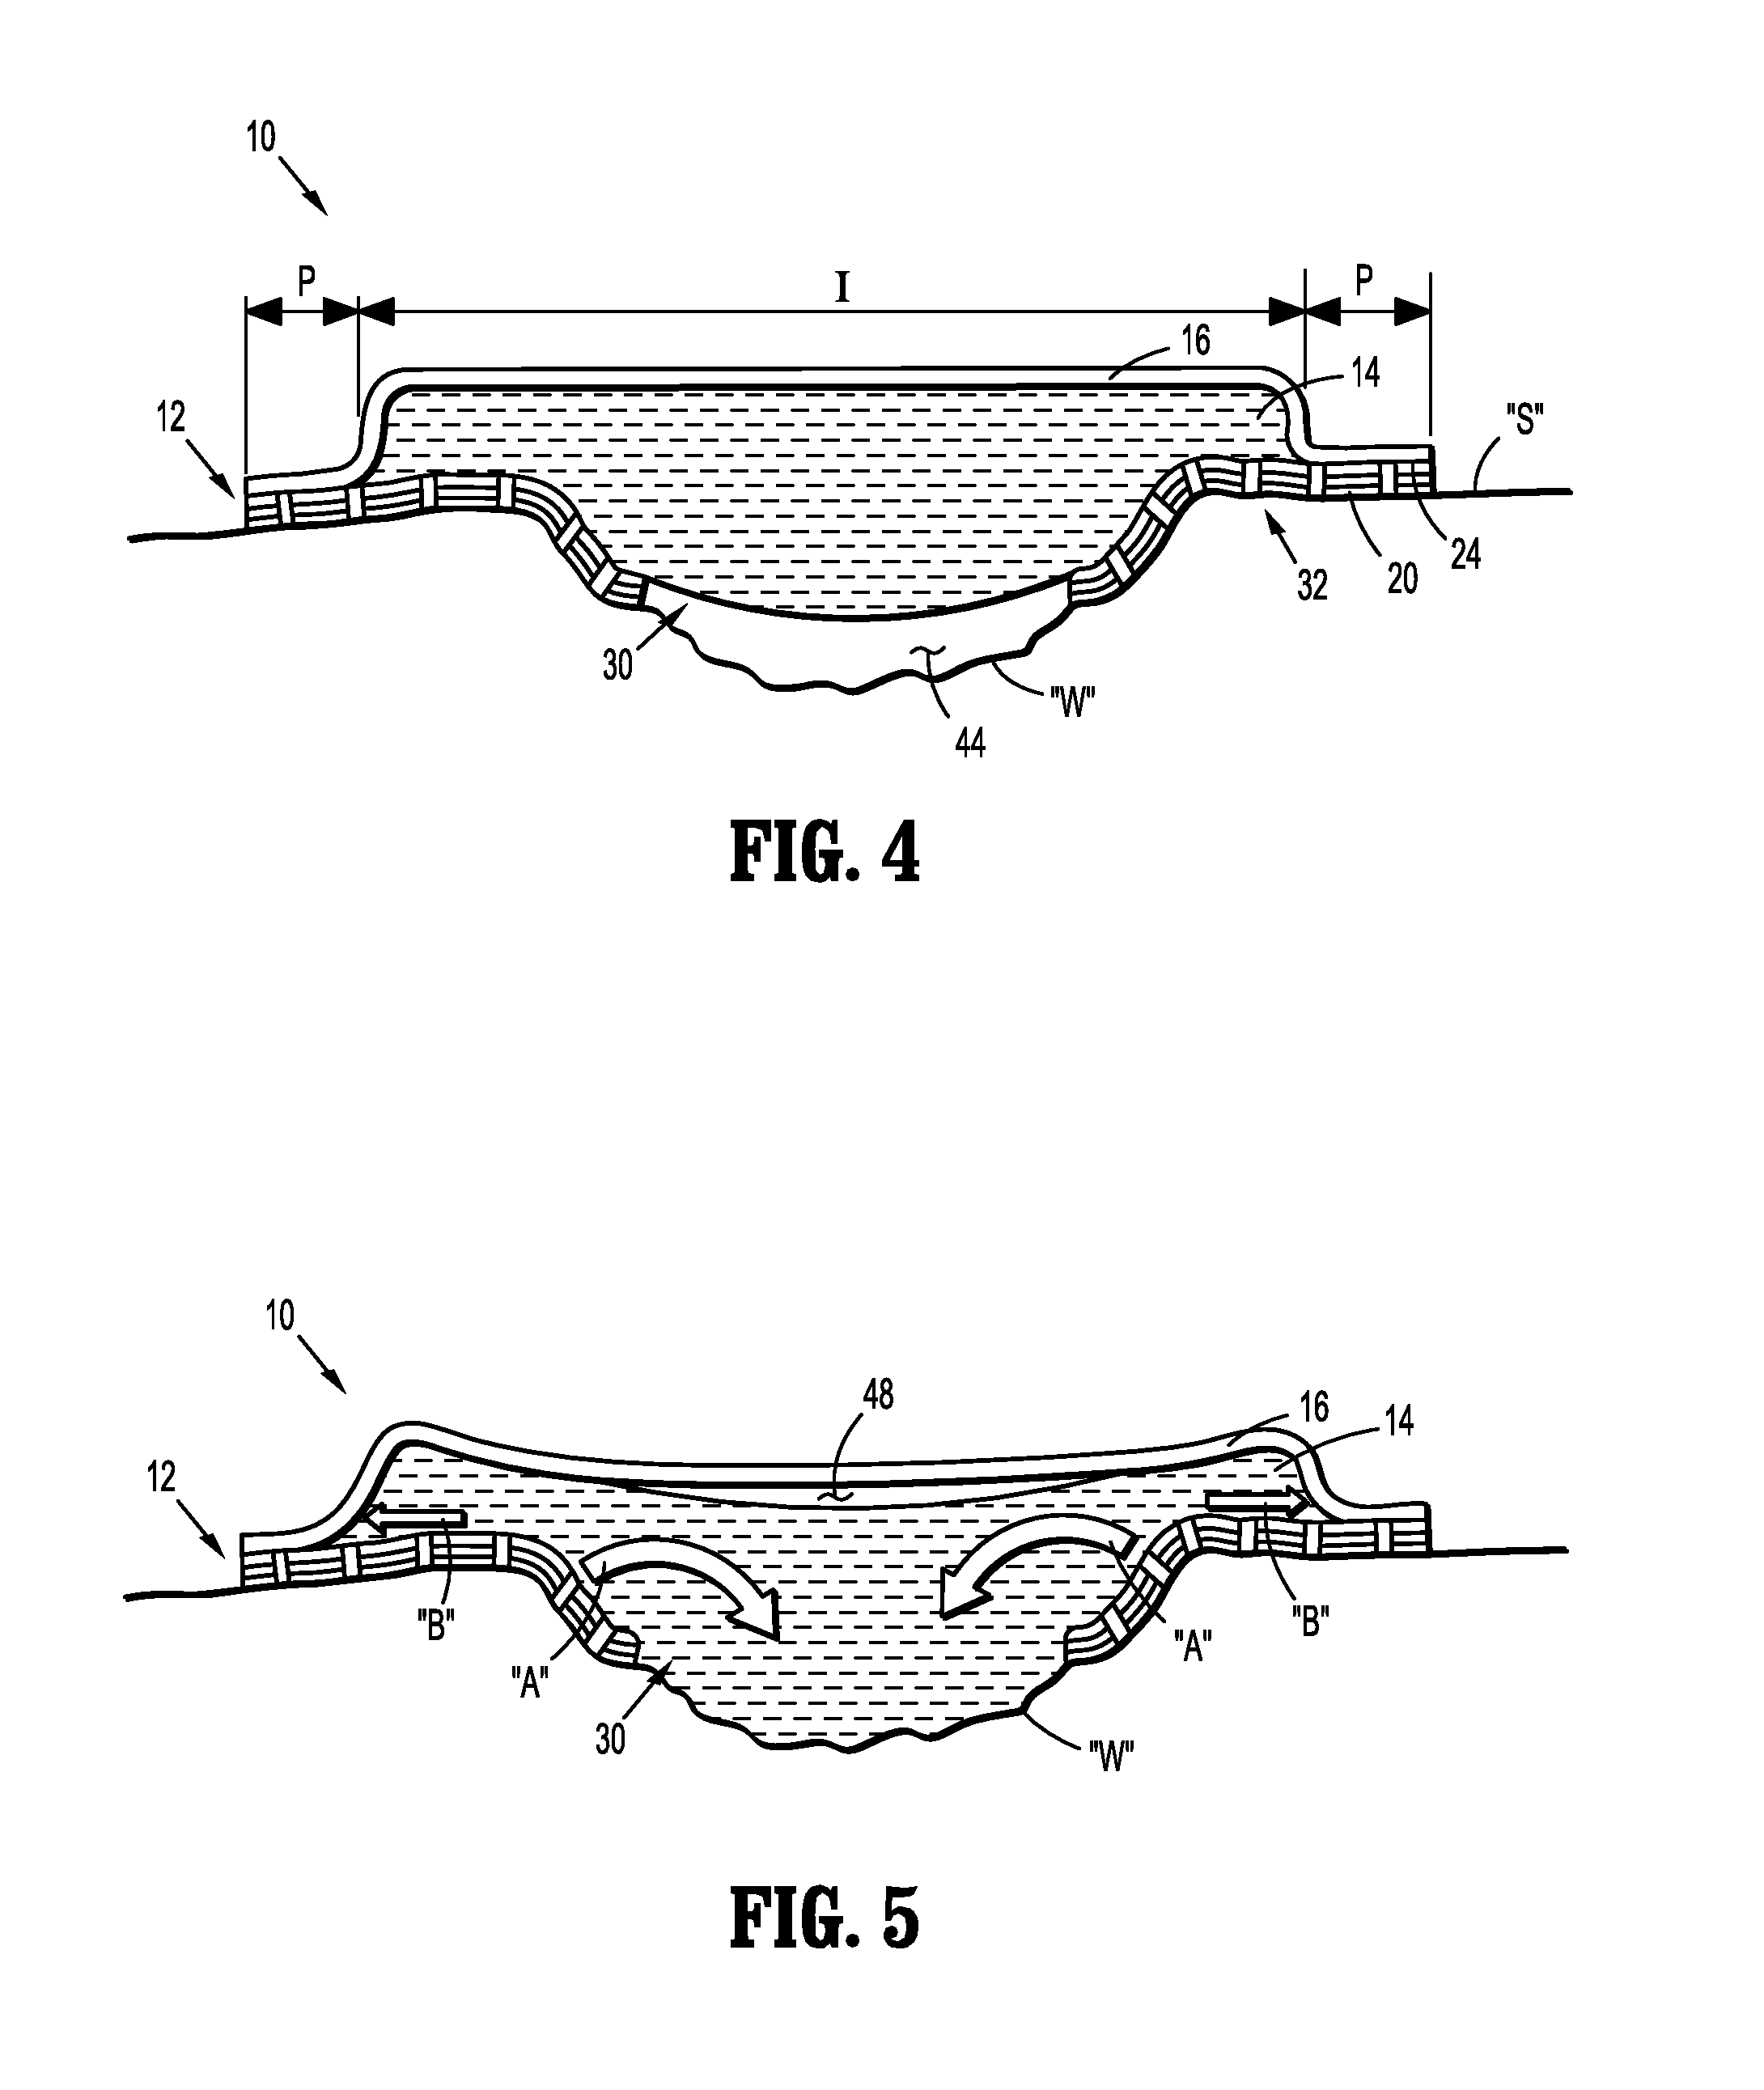 Wound Dressing with Advanced Fluid Handling